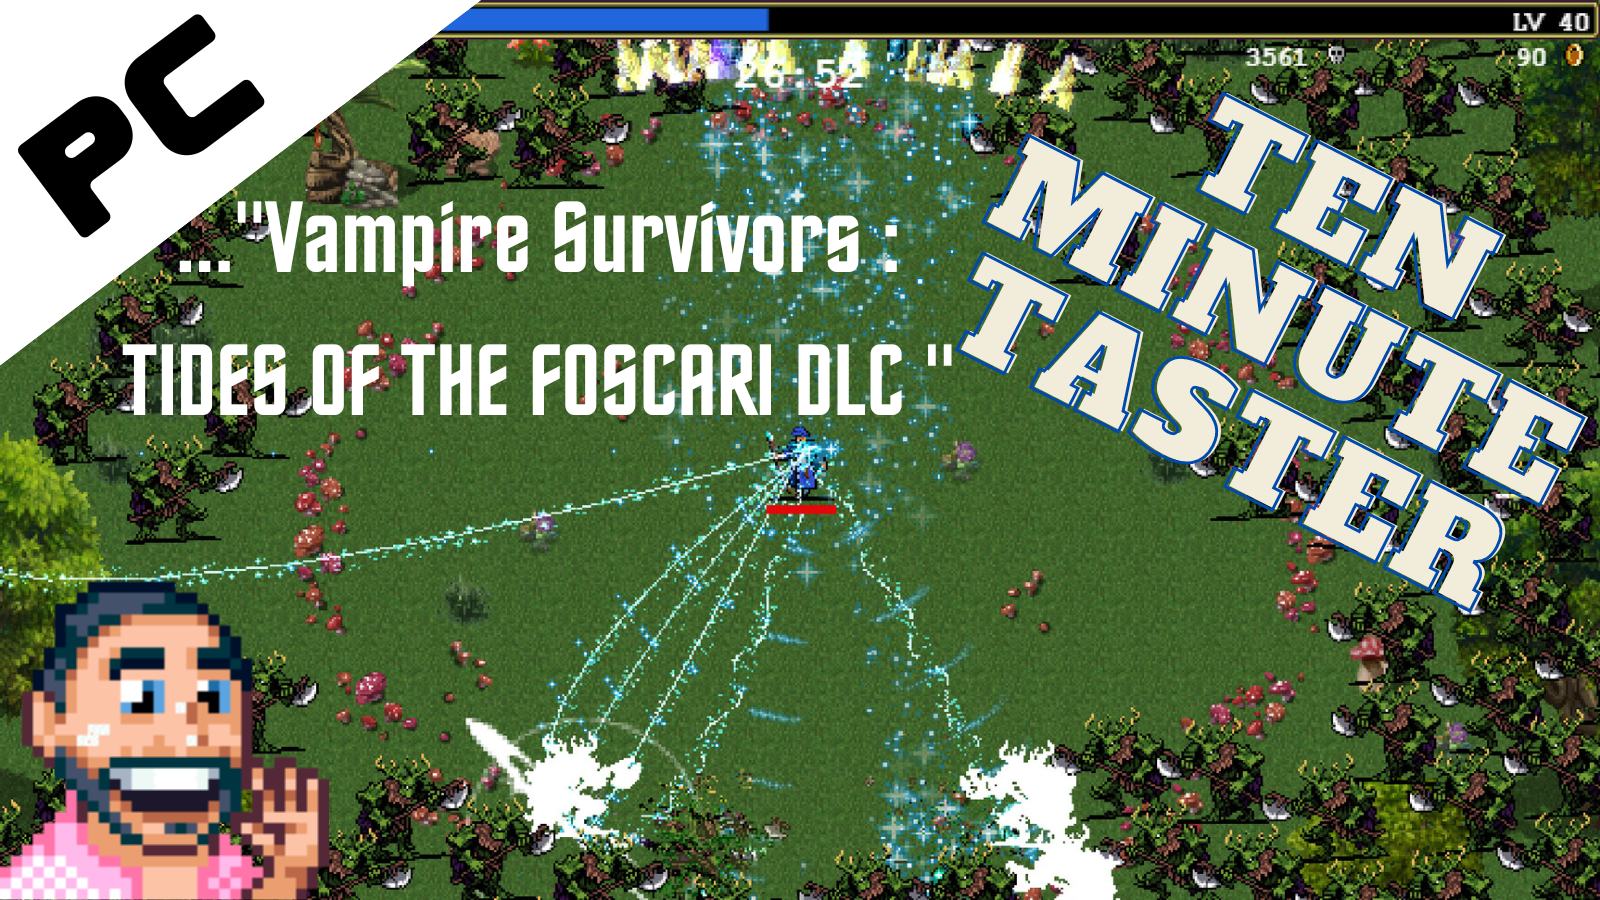 Vampire Survivors' Tides of the Foscari DLC available right now